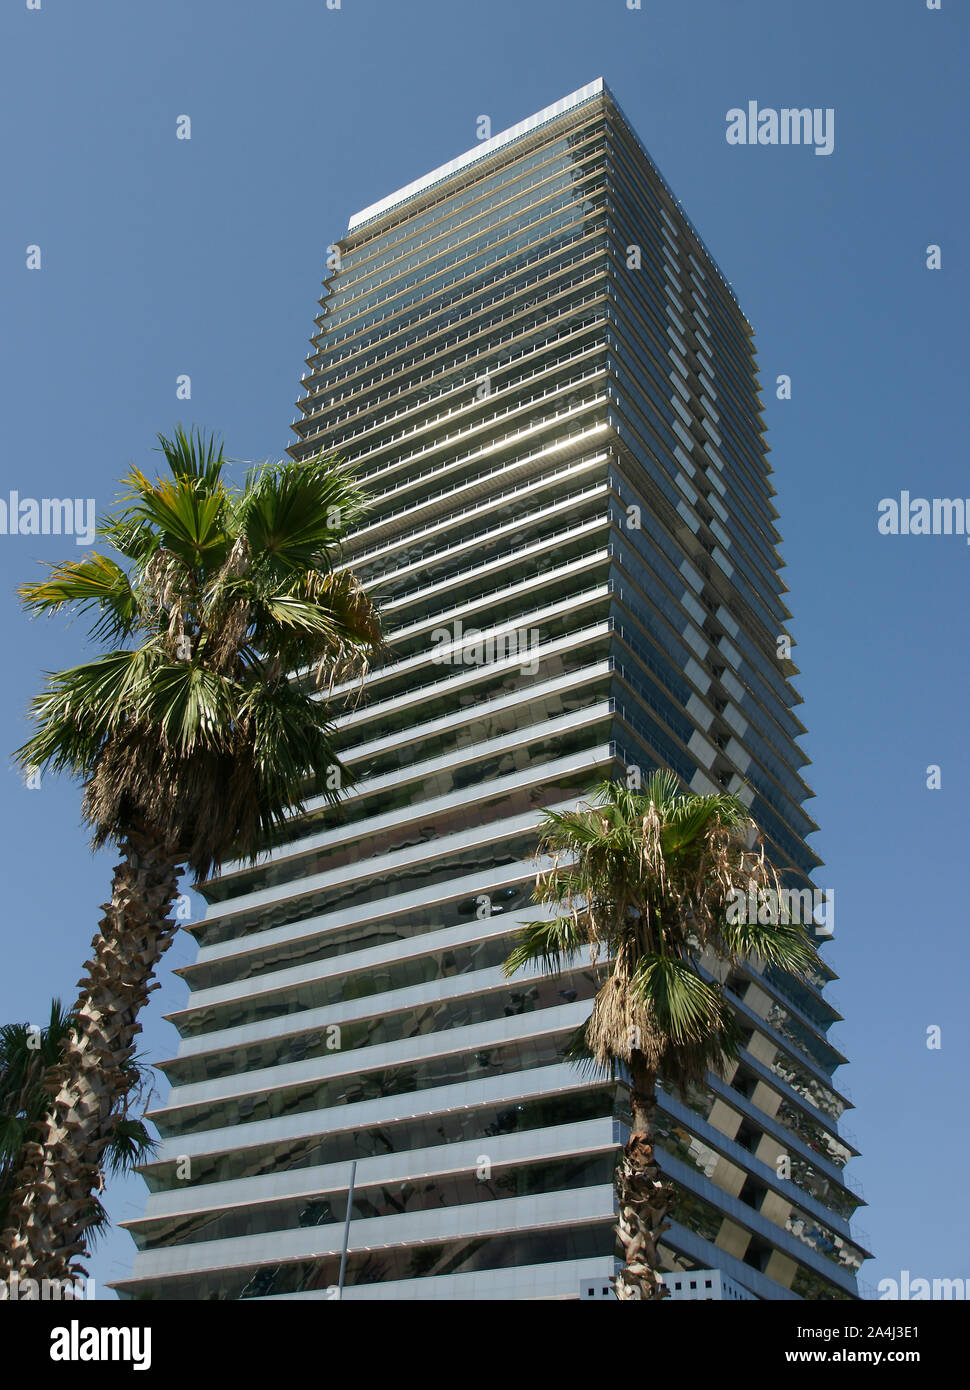 modern High rise apartment building Stock Photo